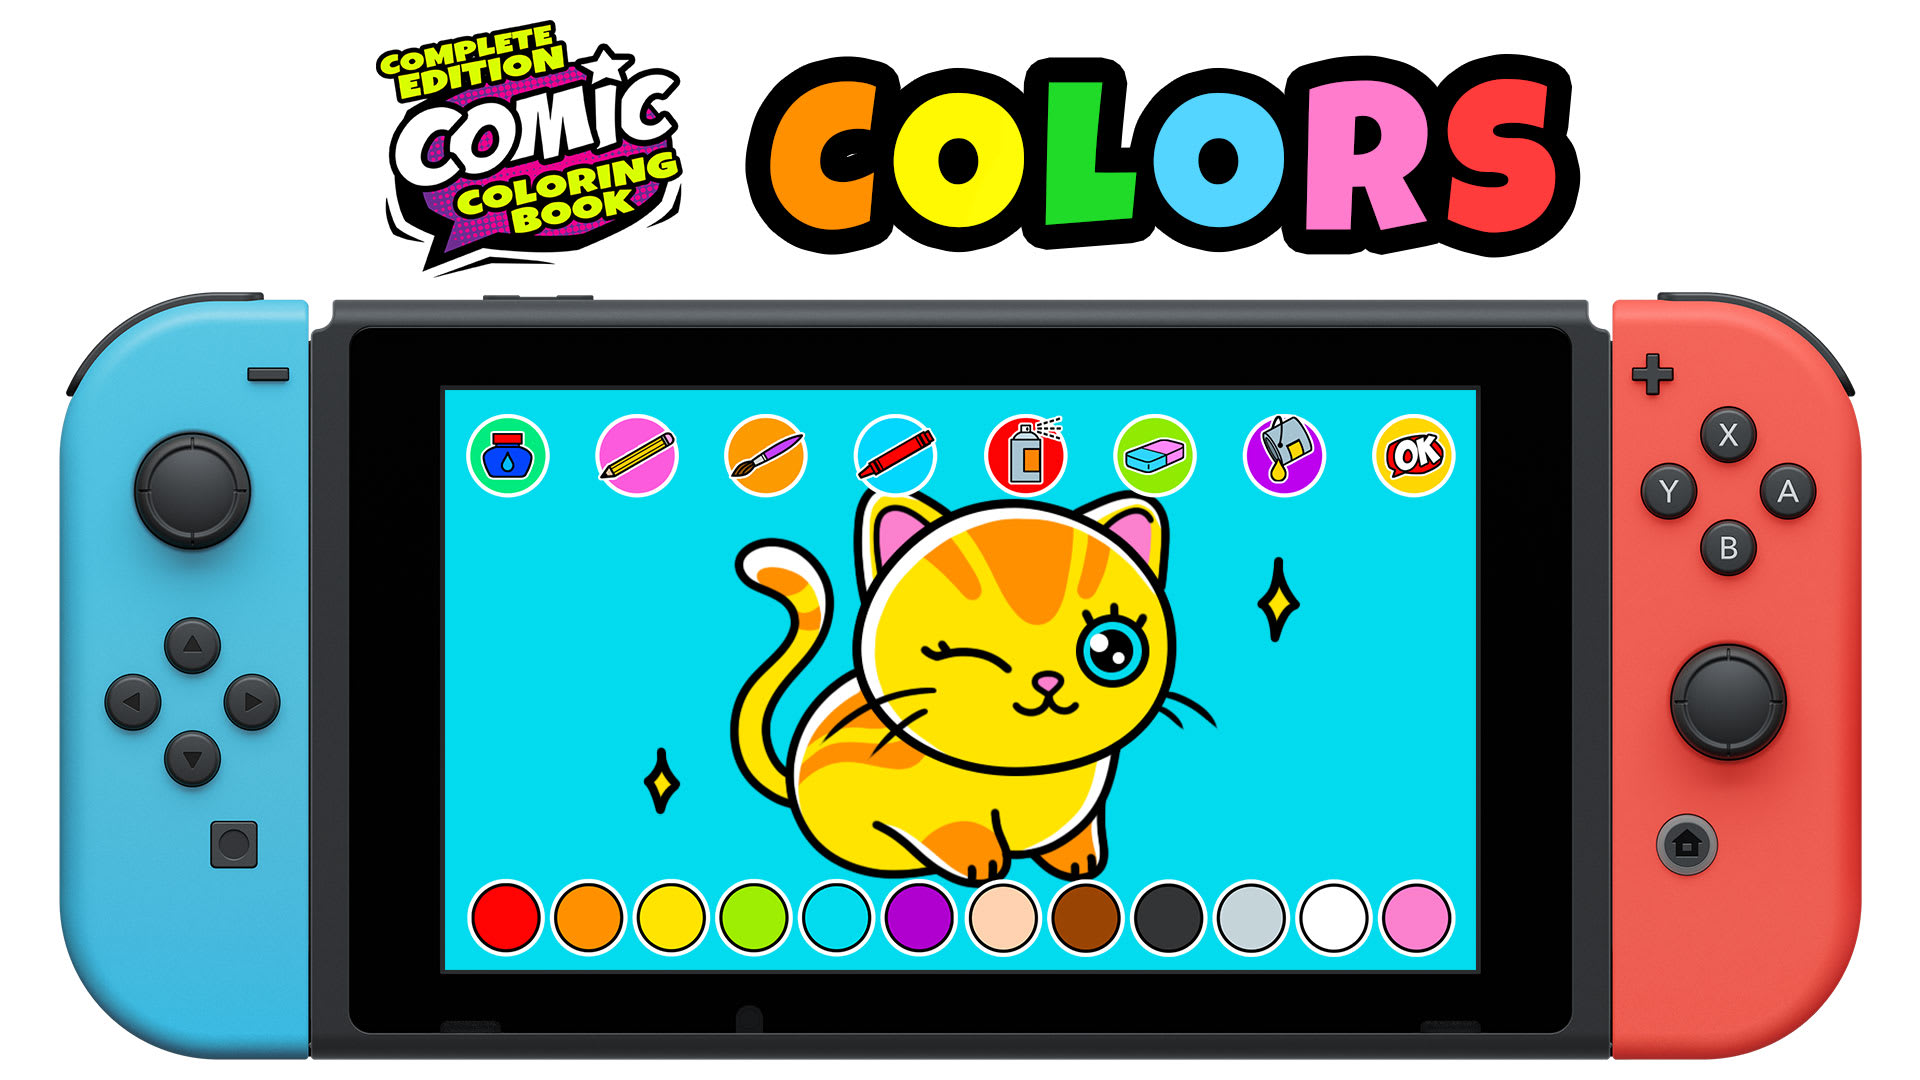 Comic Coloring Book Complete Edition: COLORS